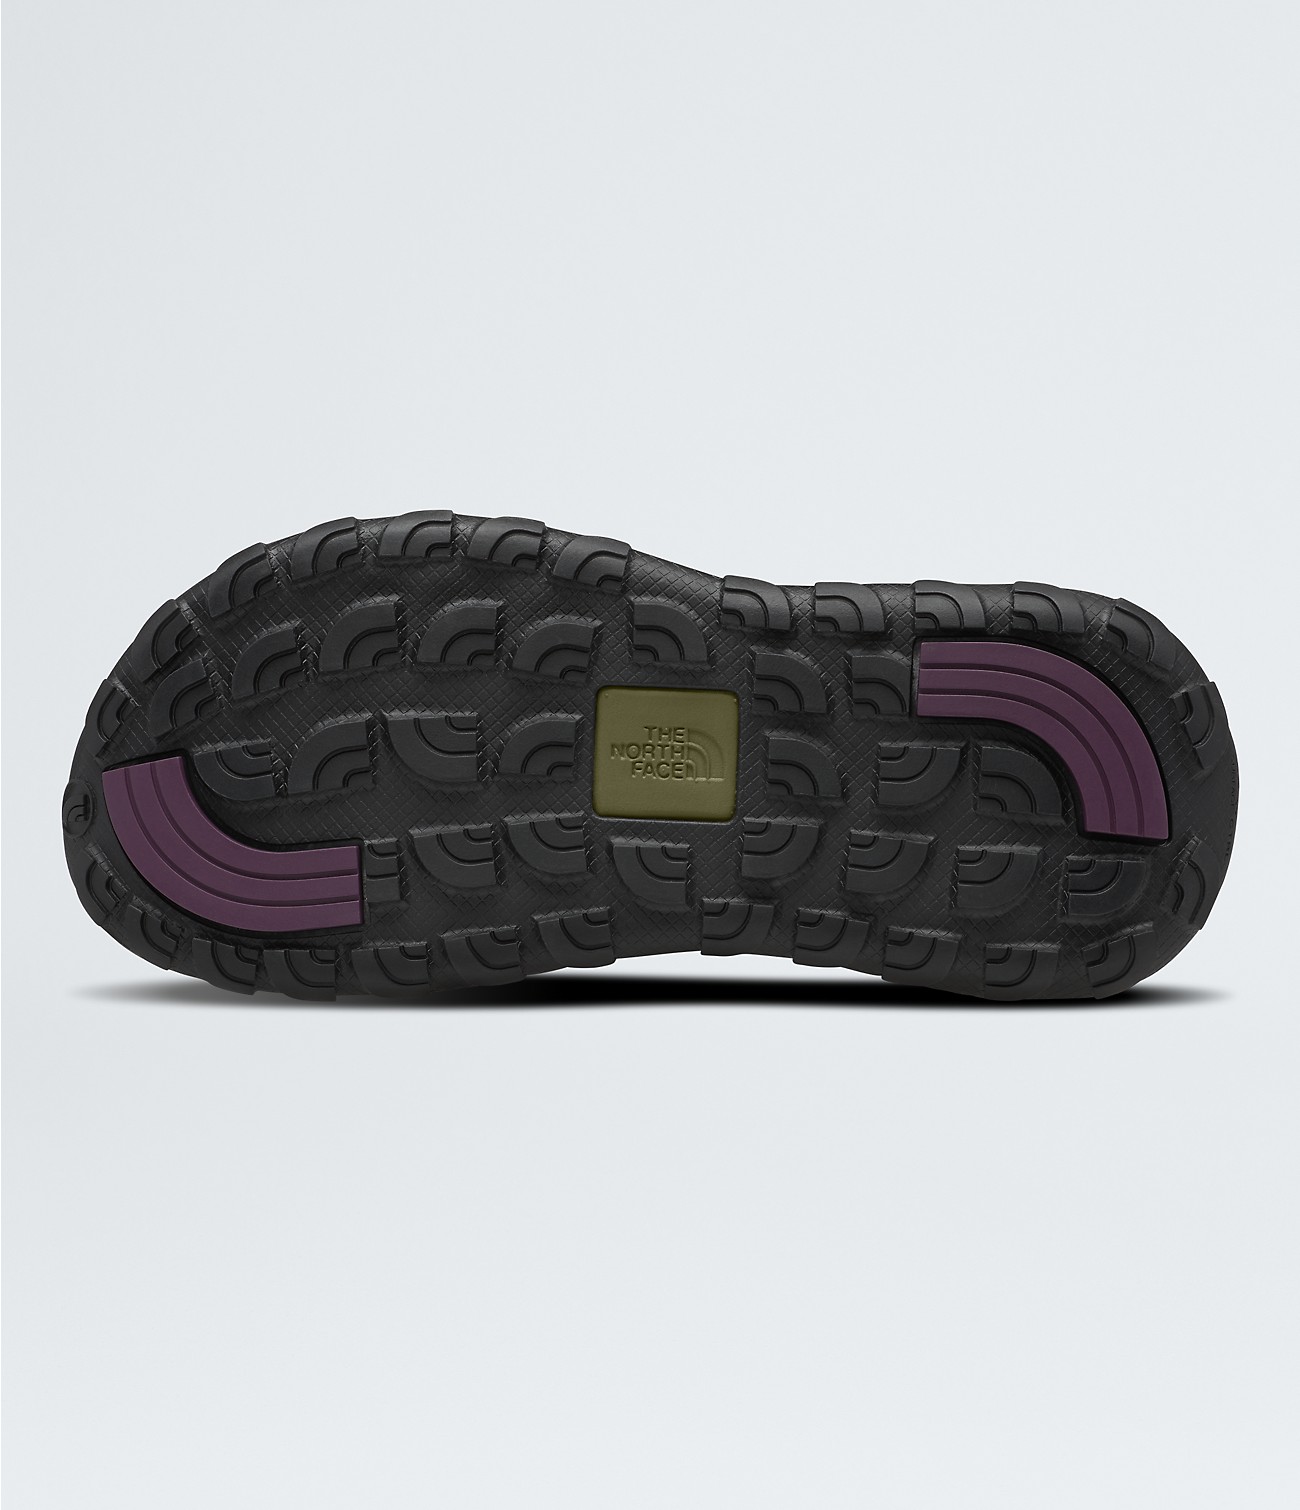 Women’s Explore Camp Sandals x Hike Clerb | The North Face